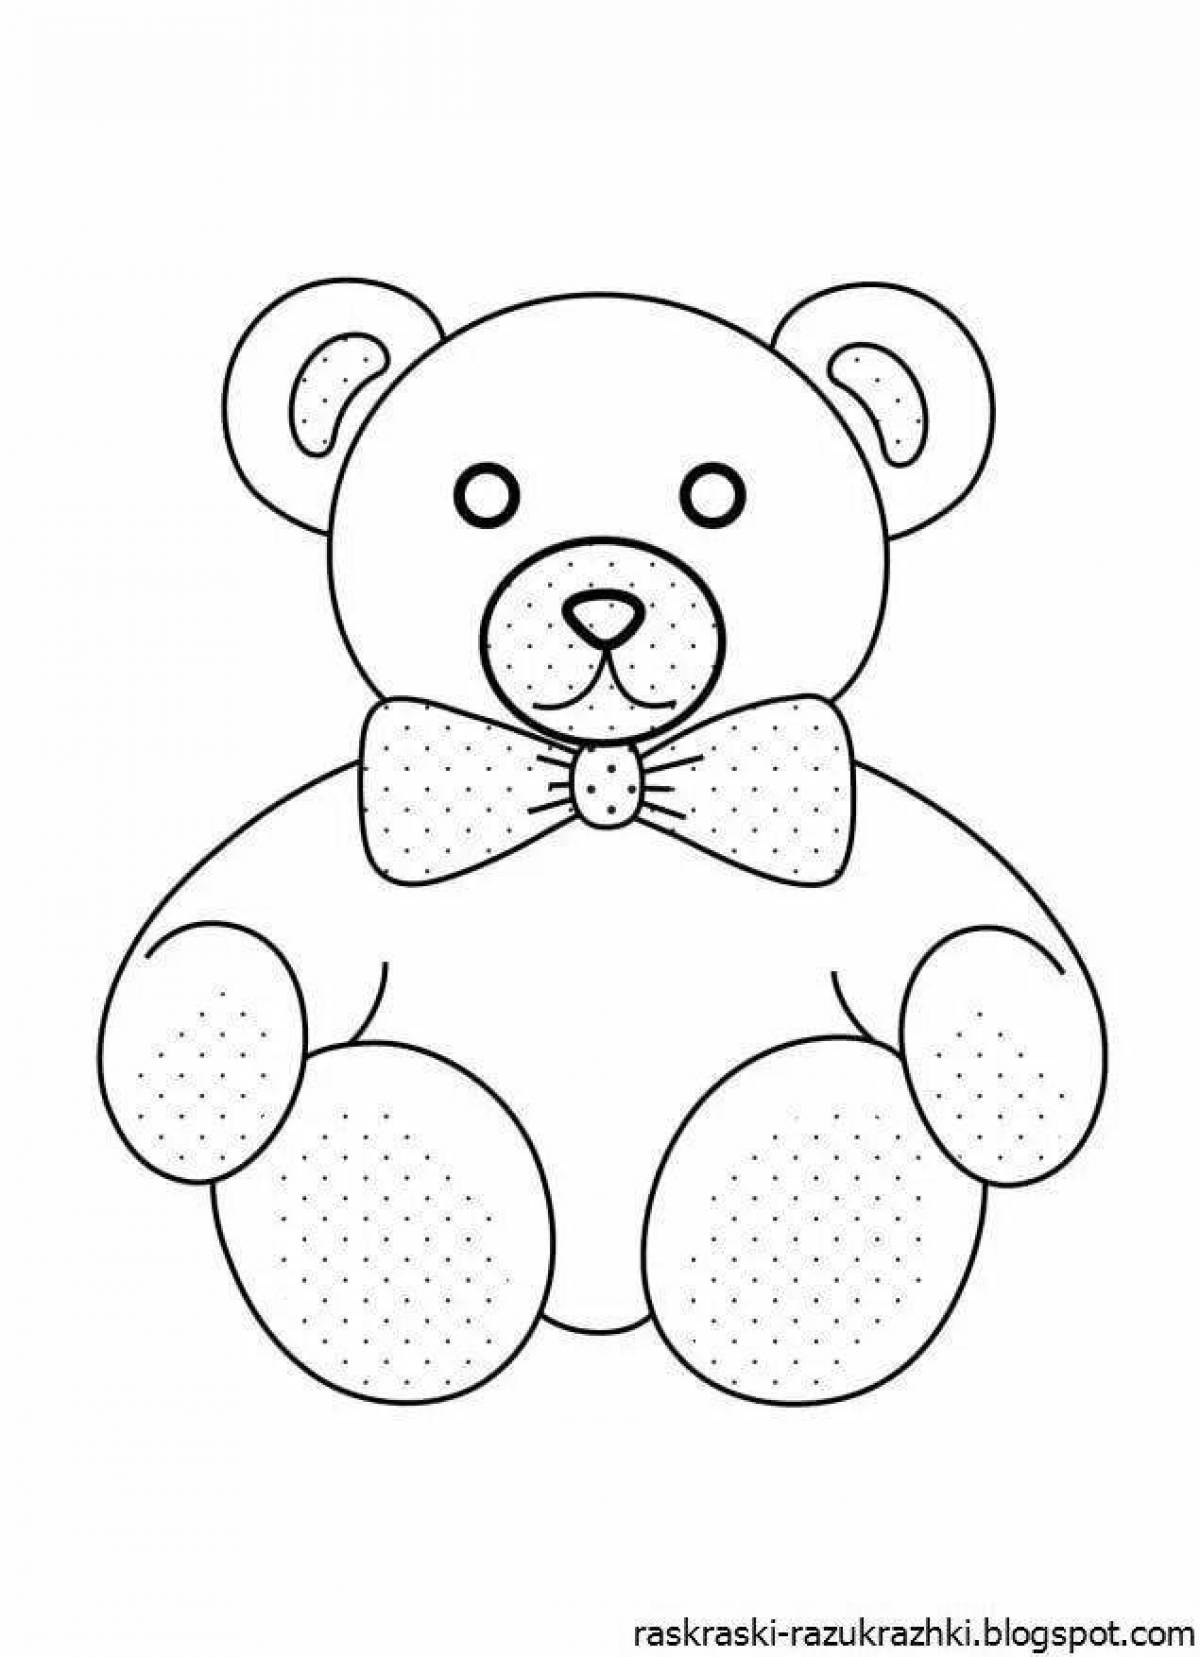 Coloring showy bear for children 2-3 years old